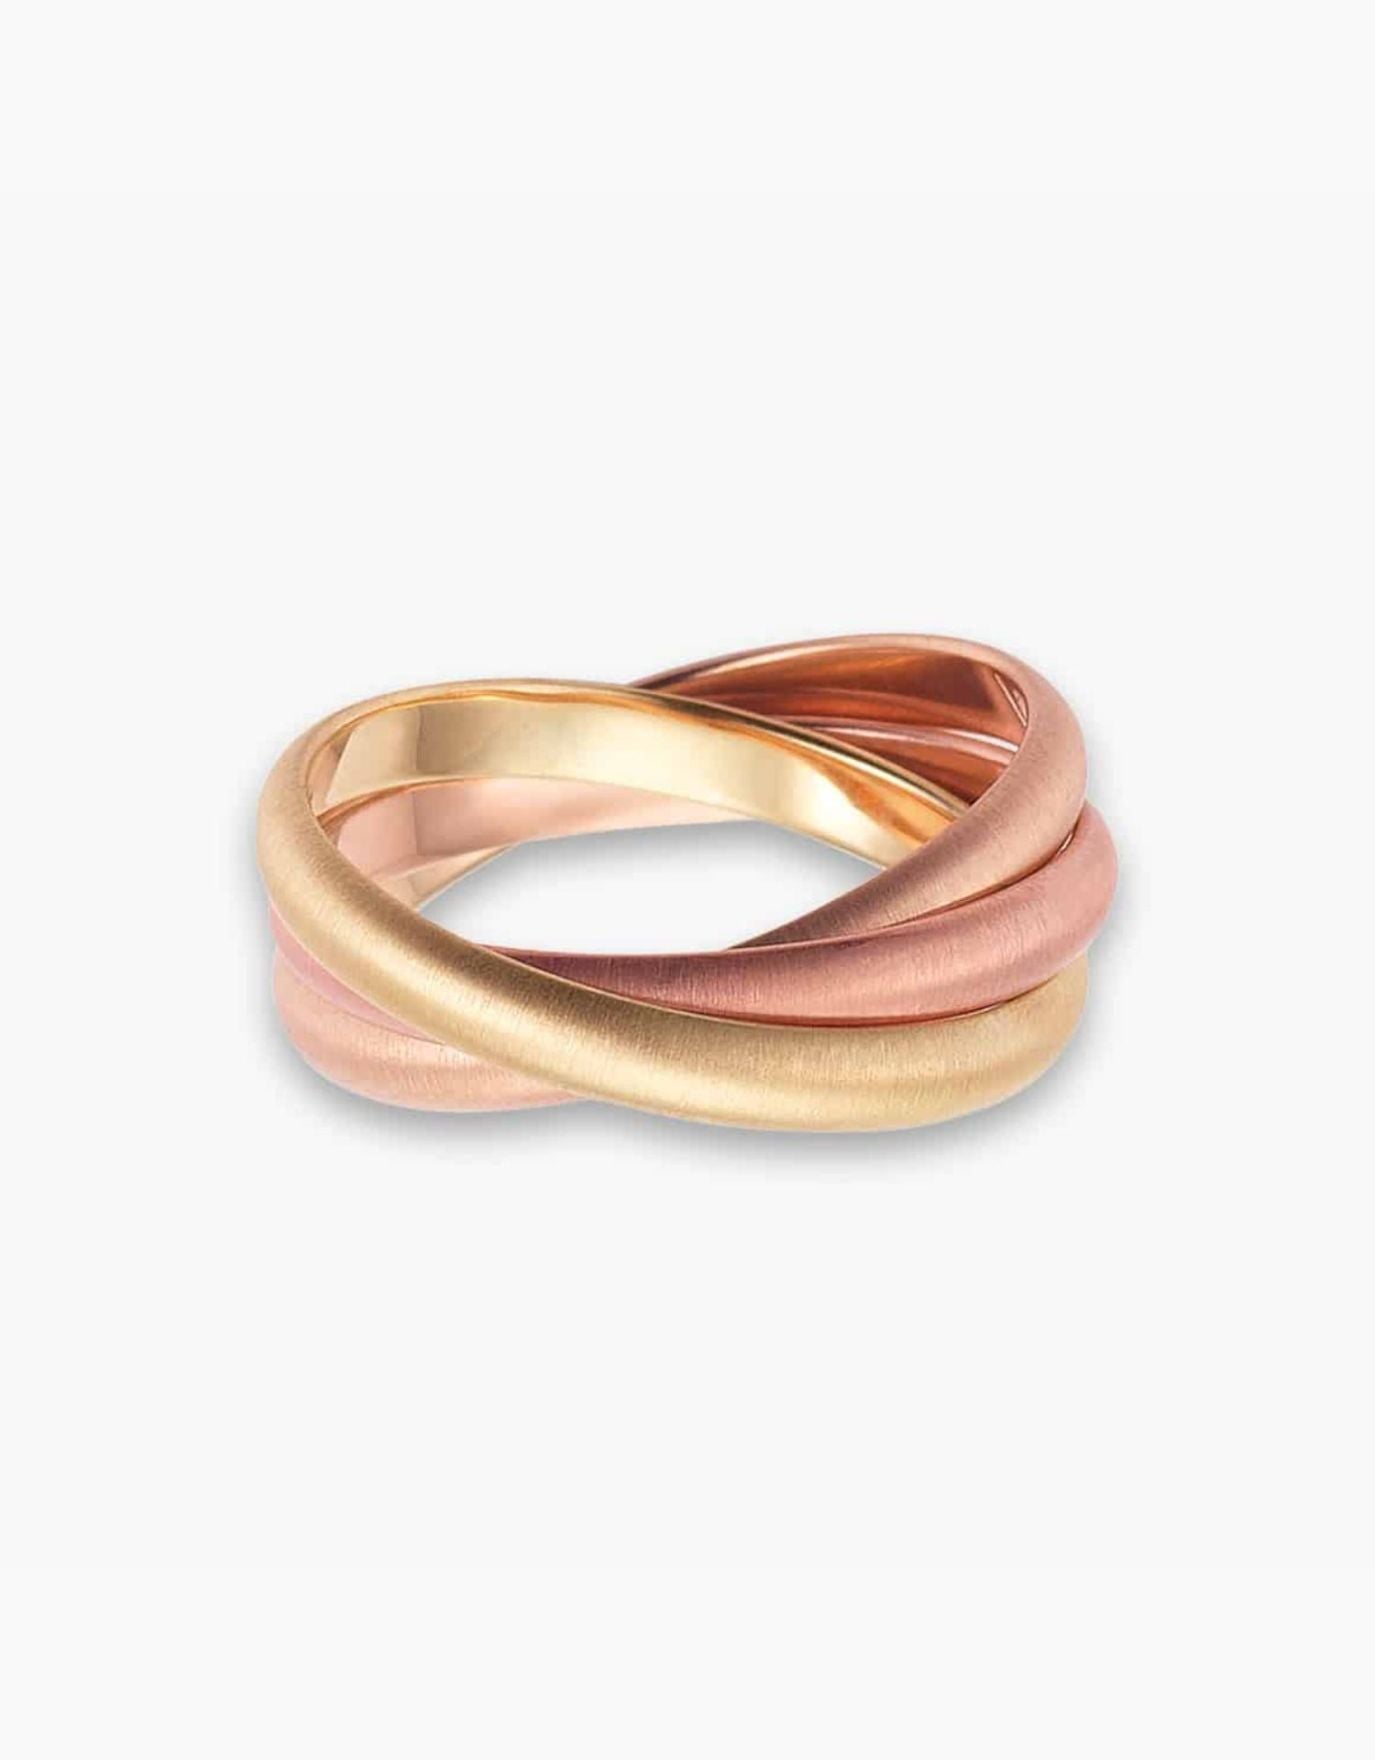 LVC Soleil Trinity Wedding Band in Yellow and Dual Rose Gold Tones